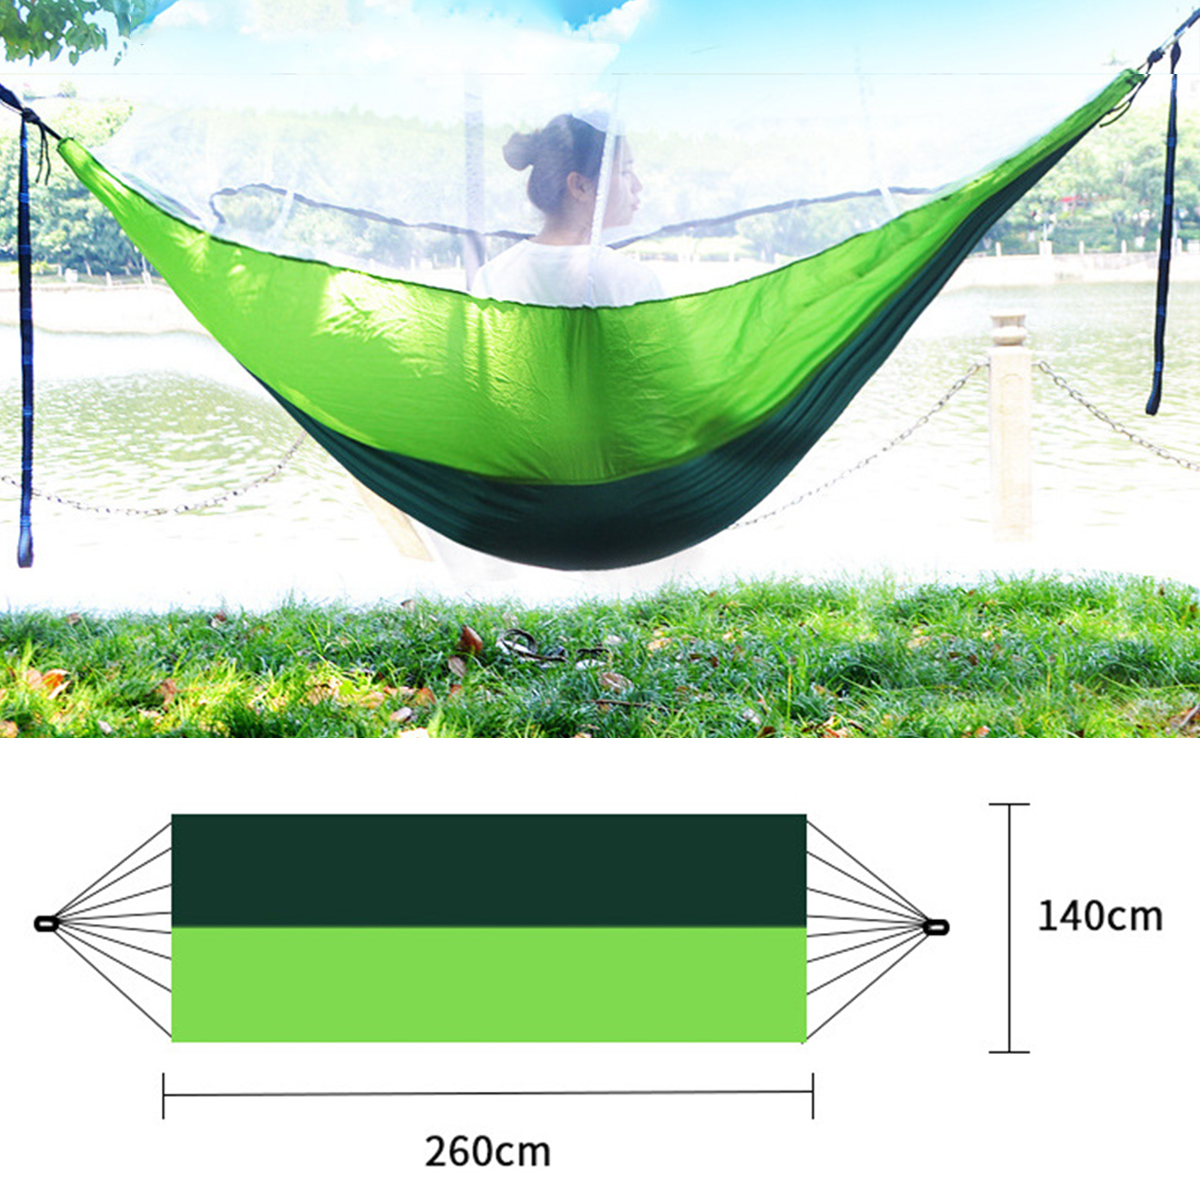 IPReereg-260140CM-With-Mosquito-Net-Portable-Travel-Hammock-Comfortable-Hommock-Camping-Bed-Fits-2-P-1726267-4